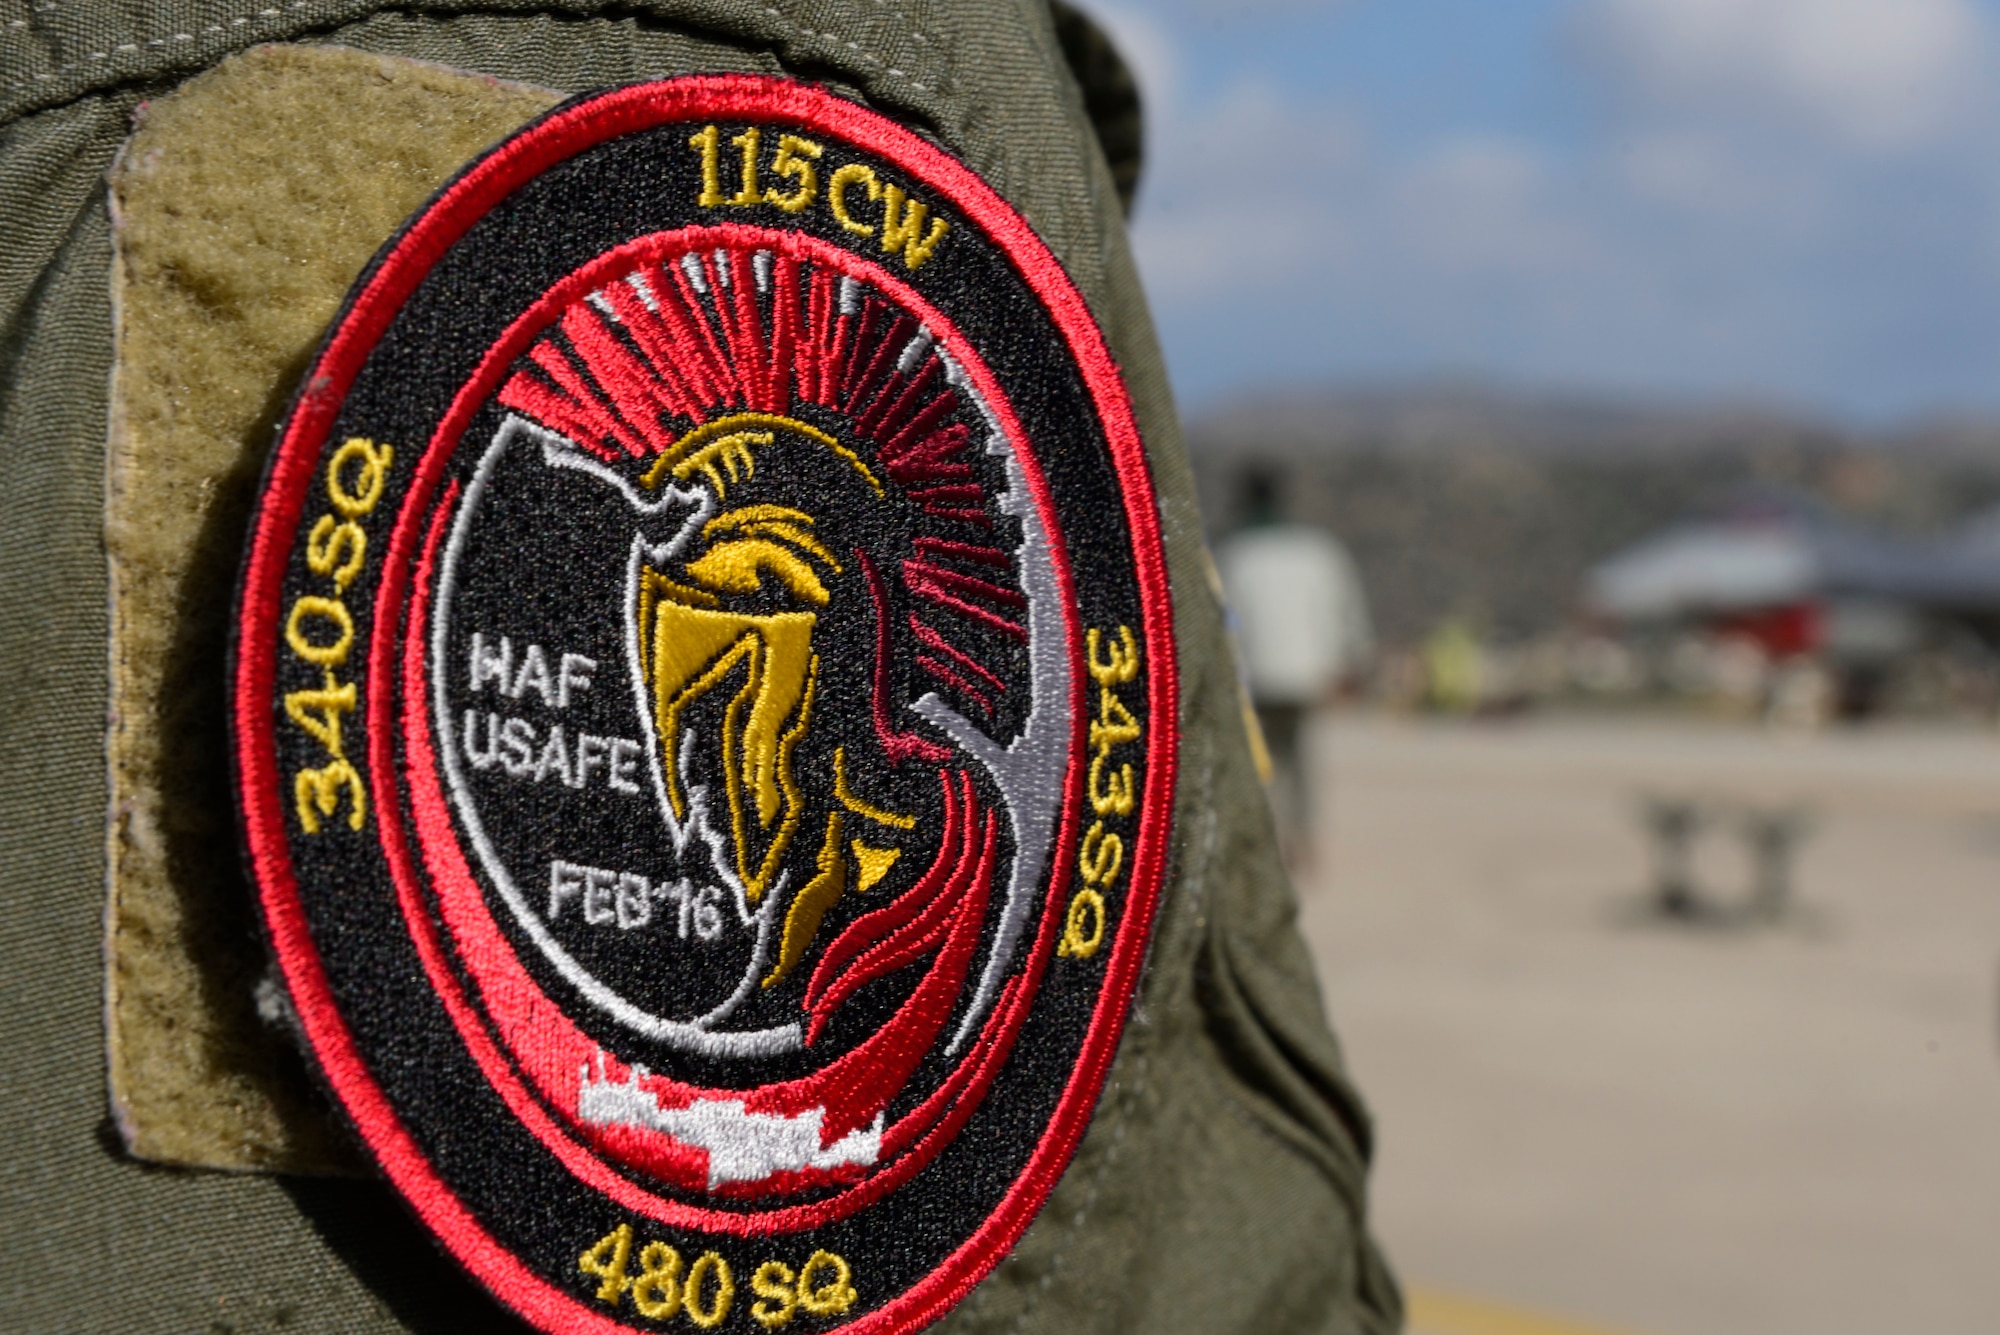 A commemorative patch hangs on an 480th Expeditionary Fighter Squadron pilots shoulder at Souda Bay, Greece, Feb. 1, 2016. The patch commemorates a flying training deployment between the U.S. Air Force's 480th EFS and the Hellenic air force's 115th Combat Wing held on the island of Crete Feb. 22-Feb 15, 2016. (U.S. Air Force photo by Staff Sgt. Christopher Ruano/Released)